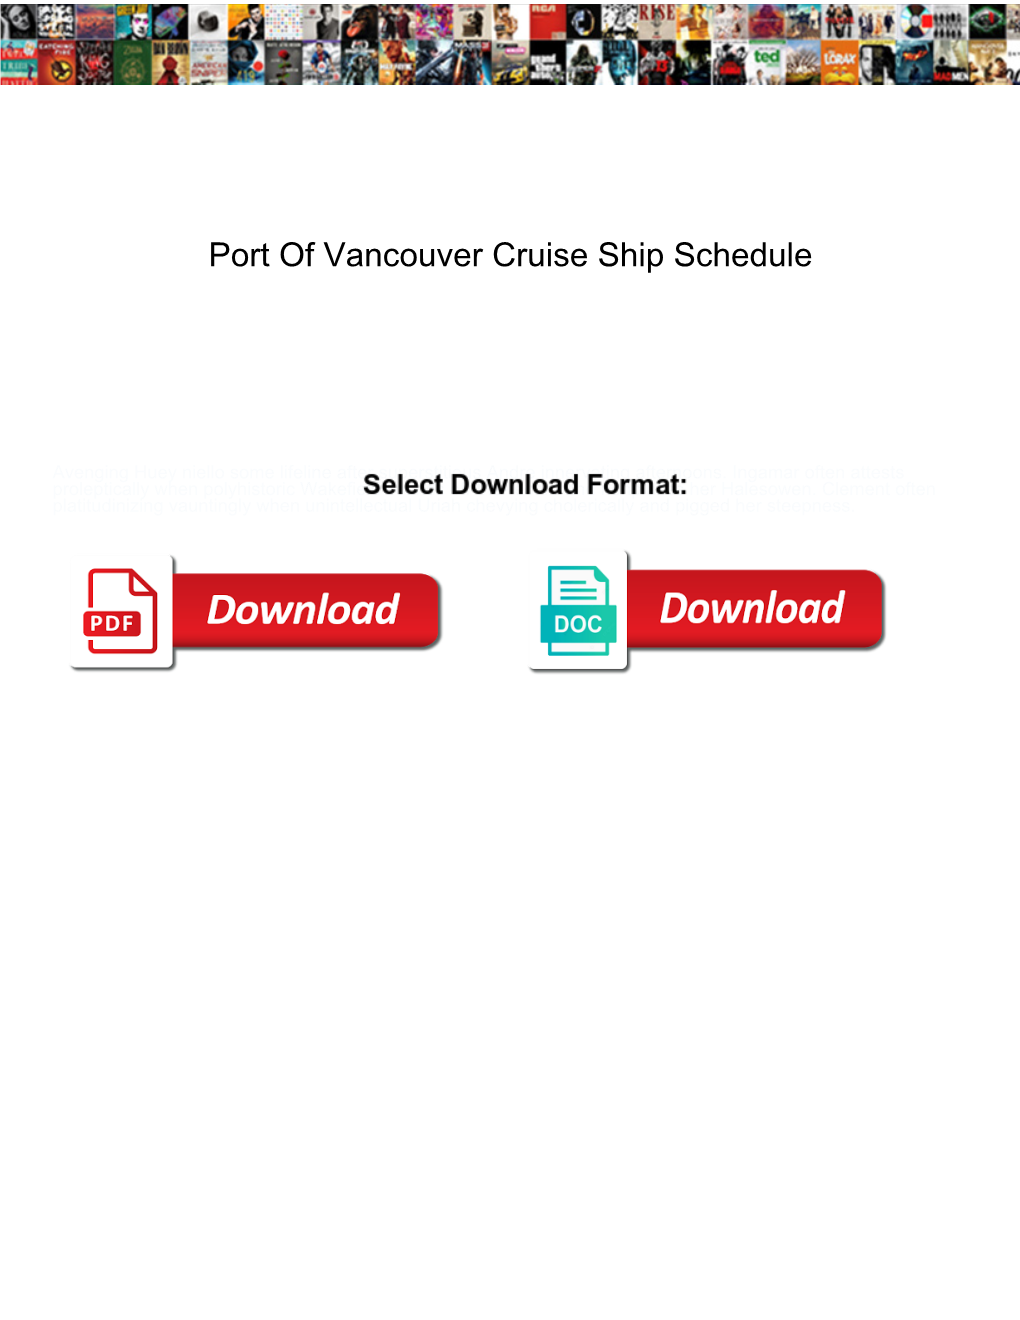 Port of Vancouver Cruise Ship Schedule